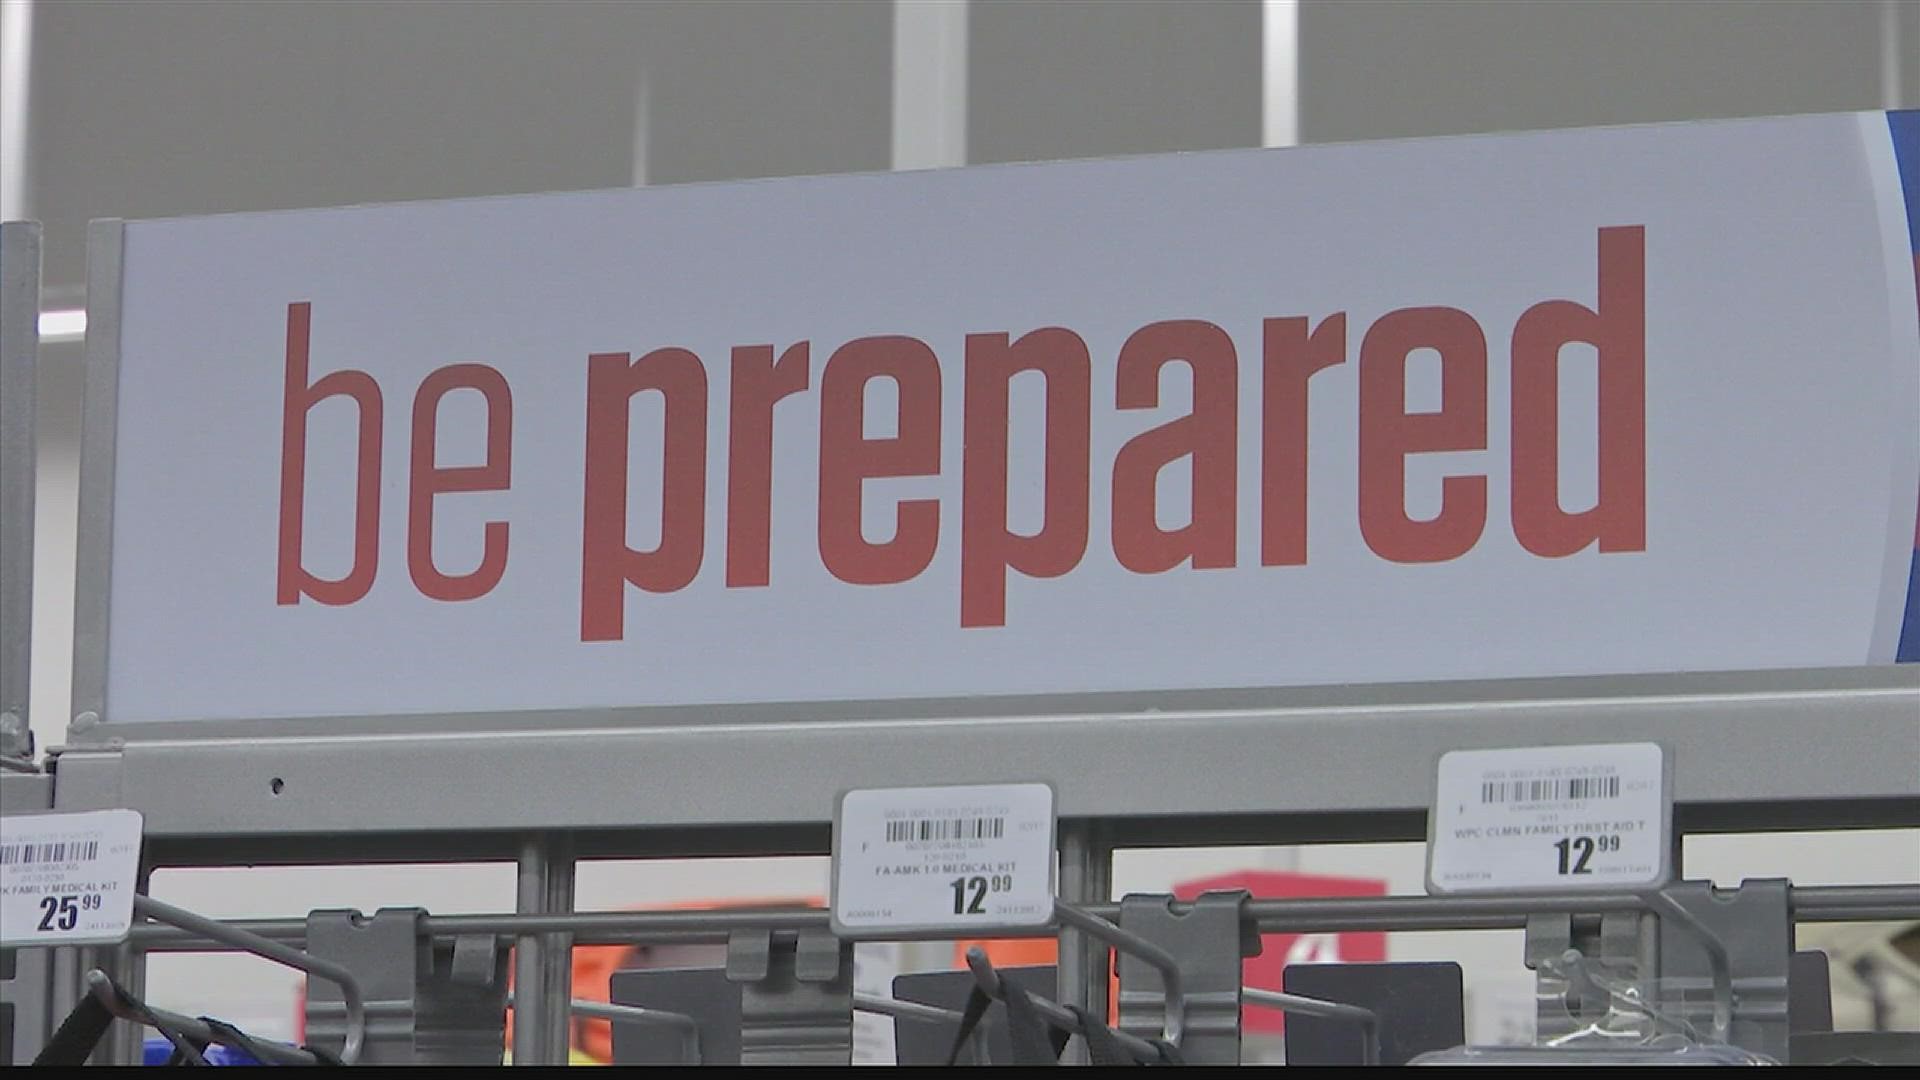 Dan Wilkerson, Huntsville Fire Marshal, says this is the perfect opportunity to get items for possible power outages along with other items to prepare.